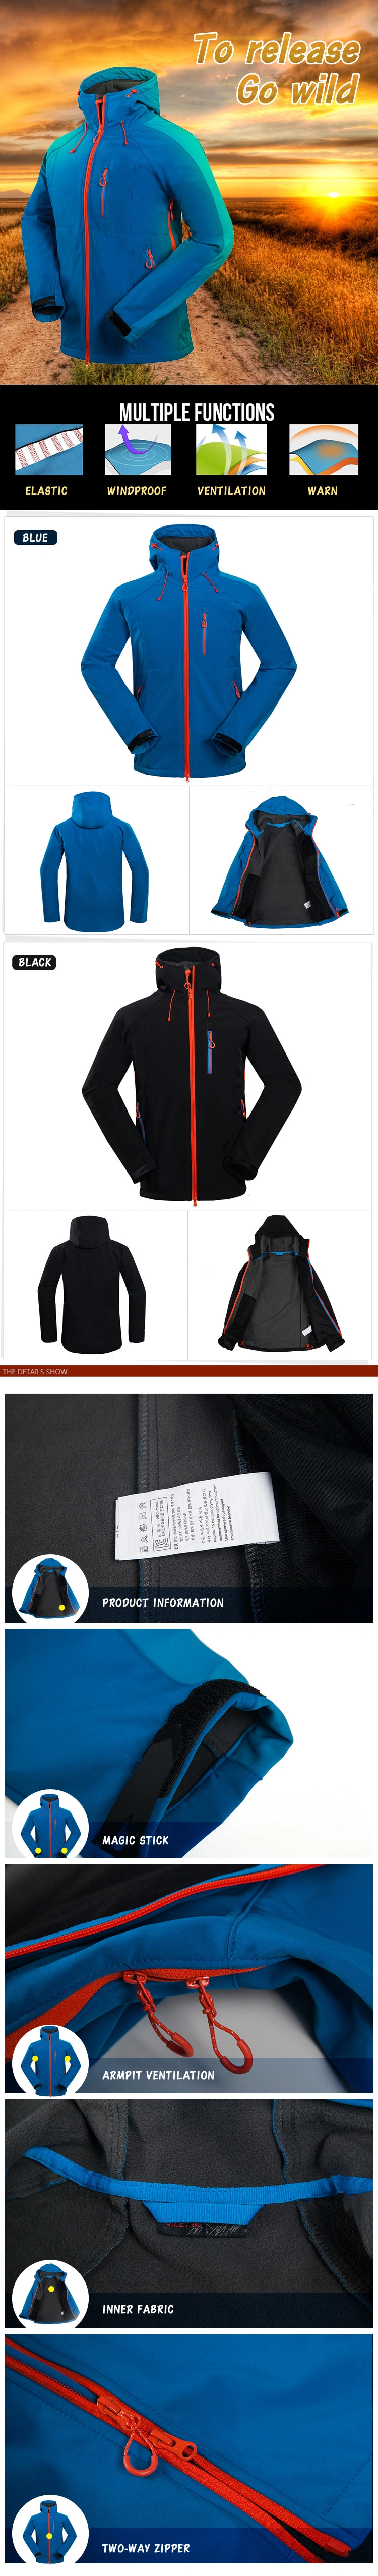 Outdoor Clothes Windbreaker Winter Jacket Men for Hiking Camping